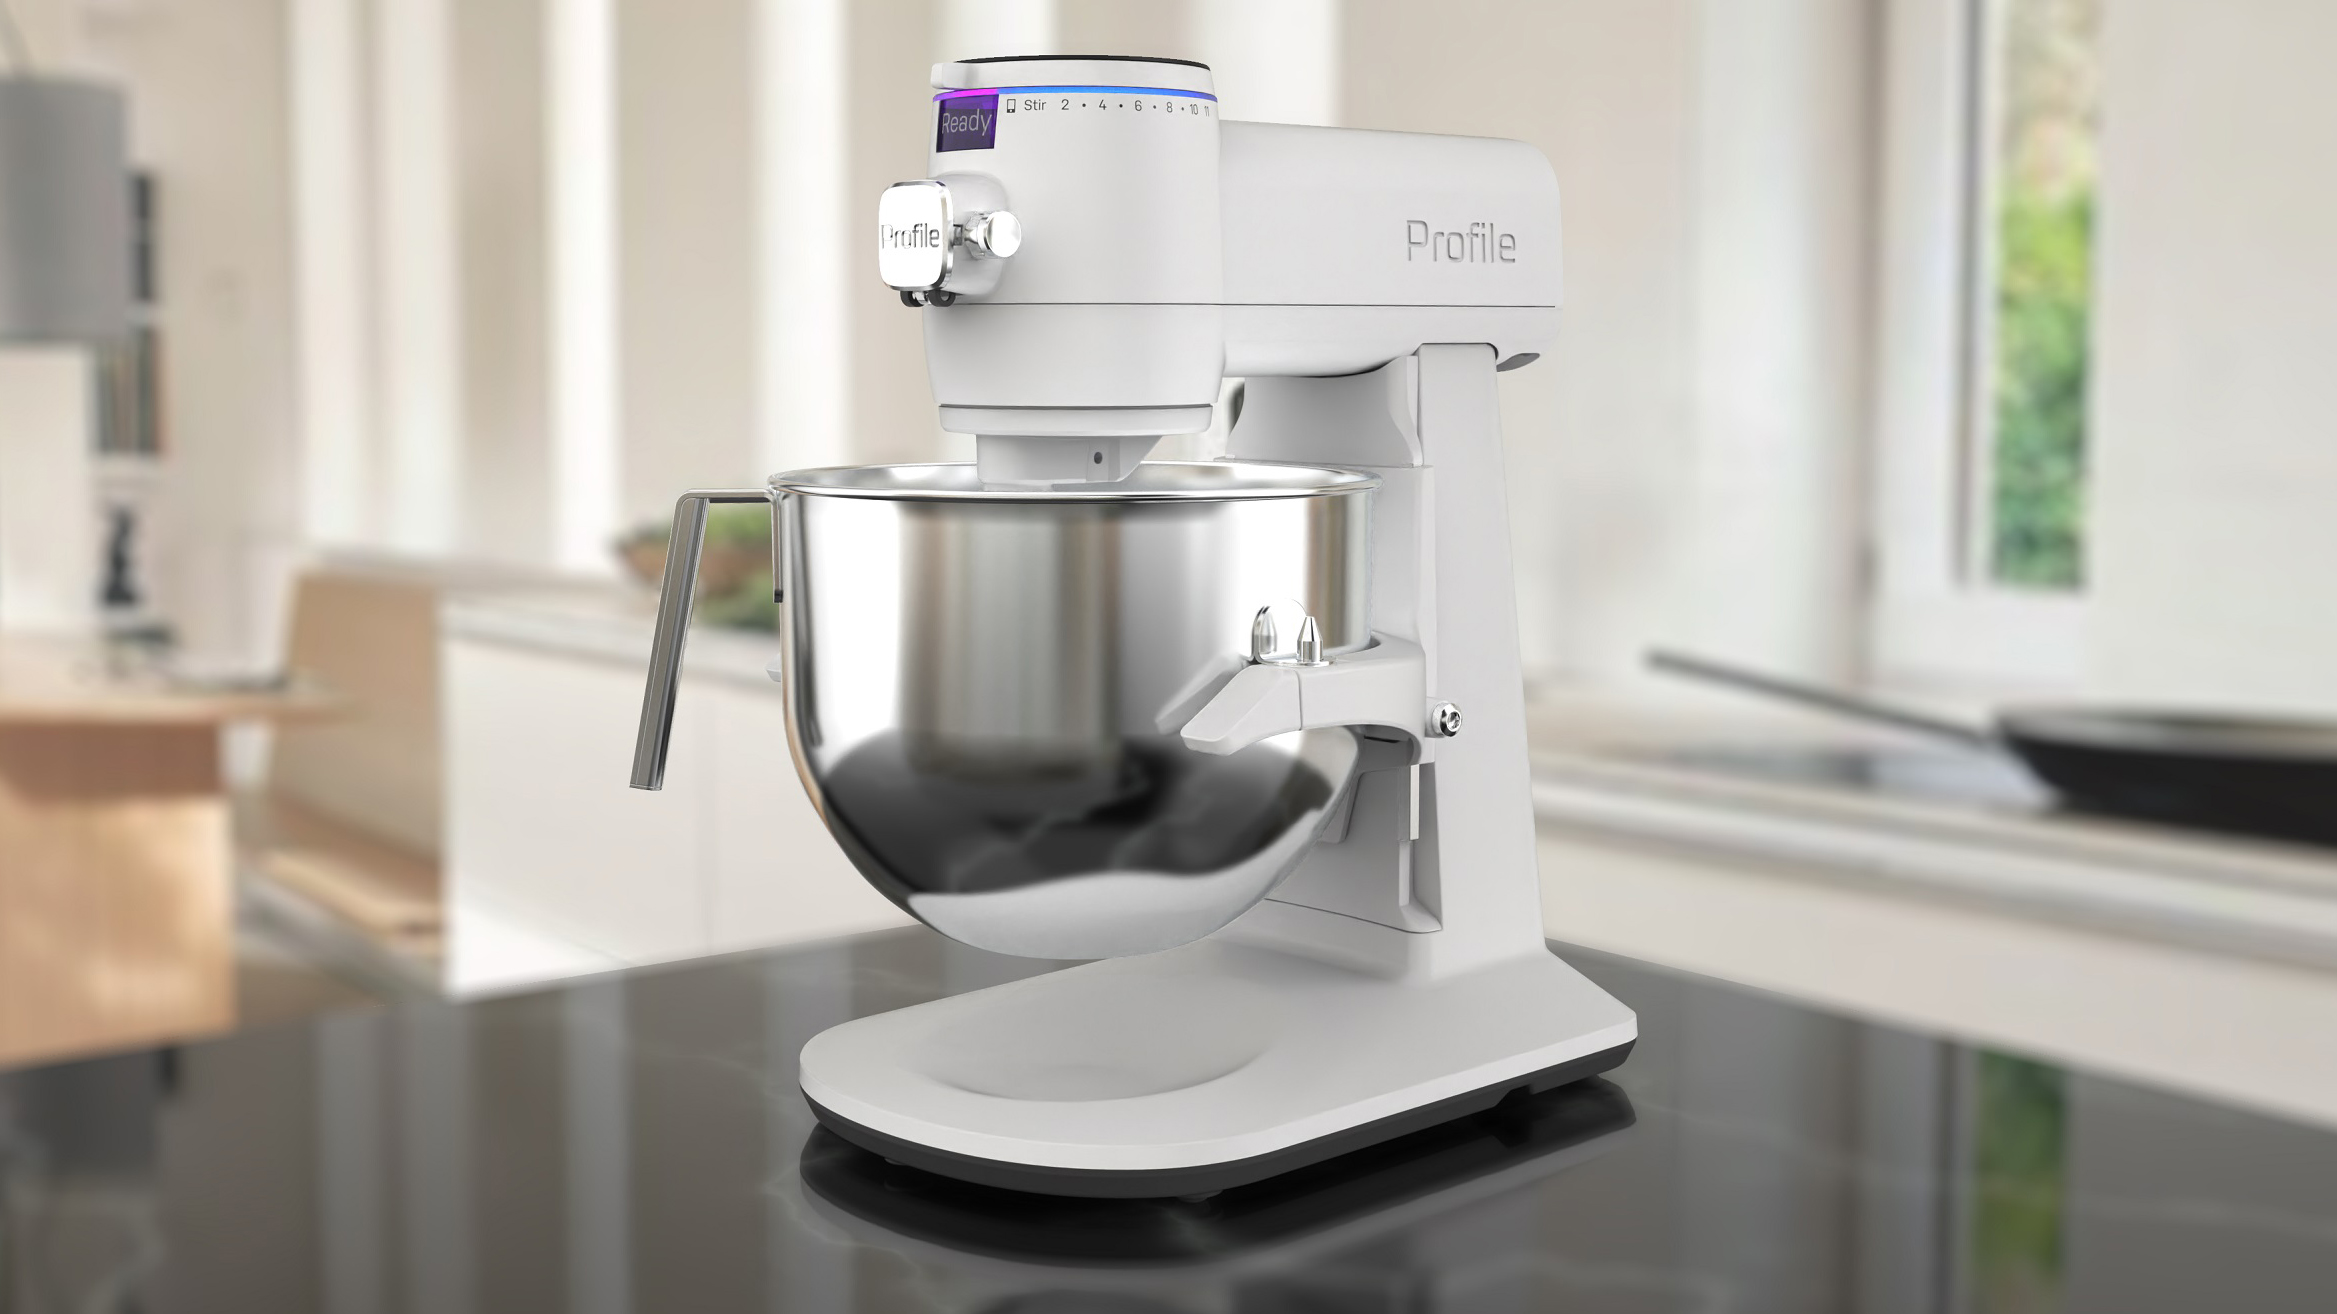 The GE Profile Stand Mixer on a kitchen counter